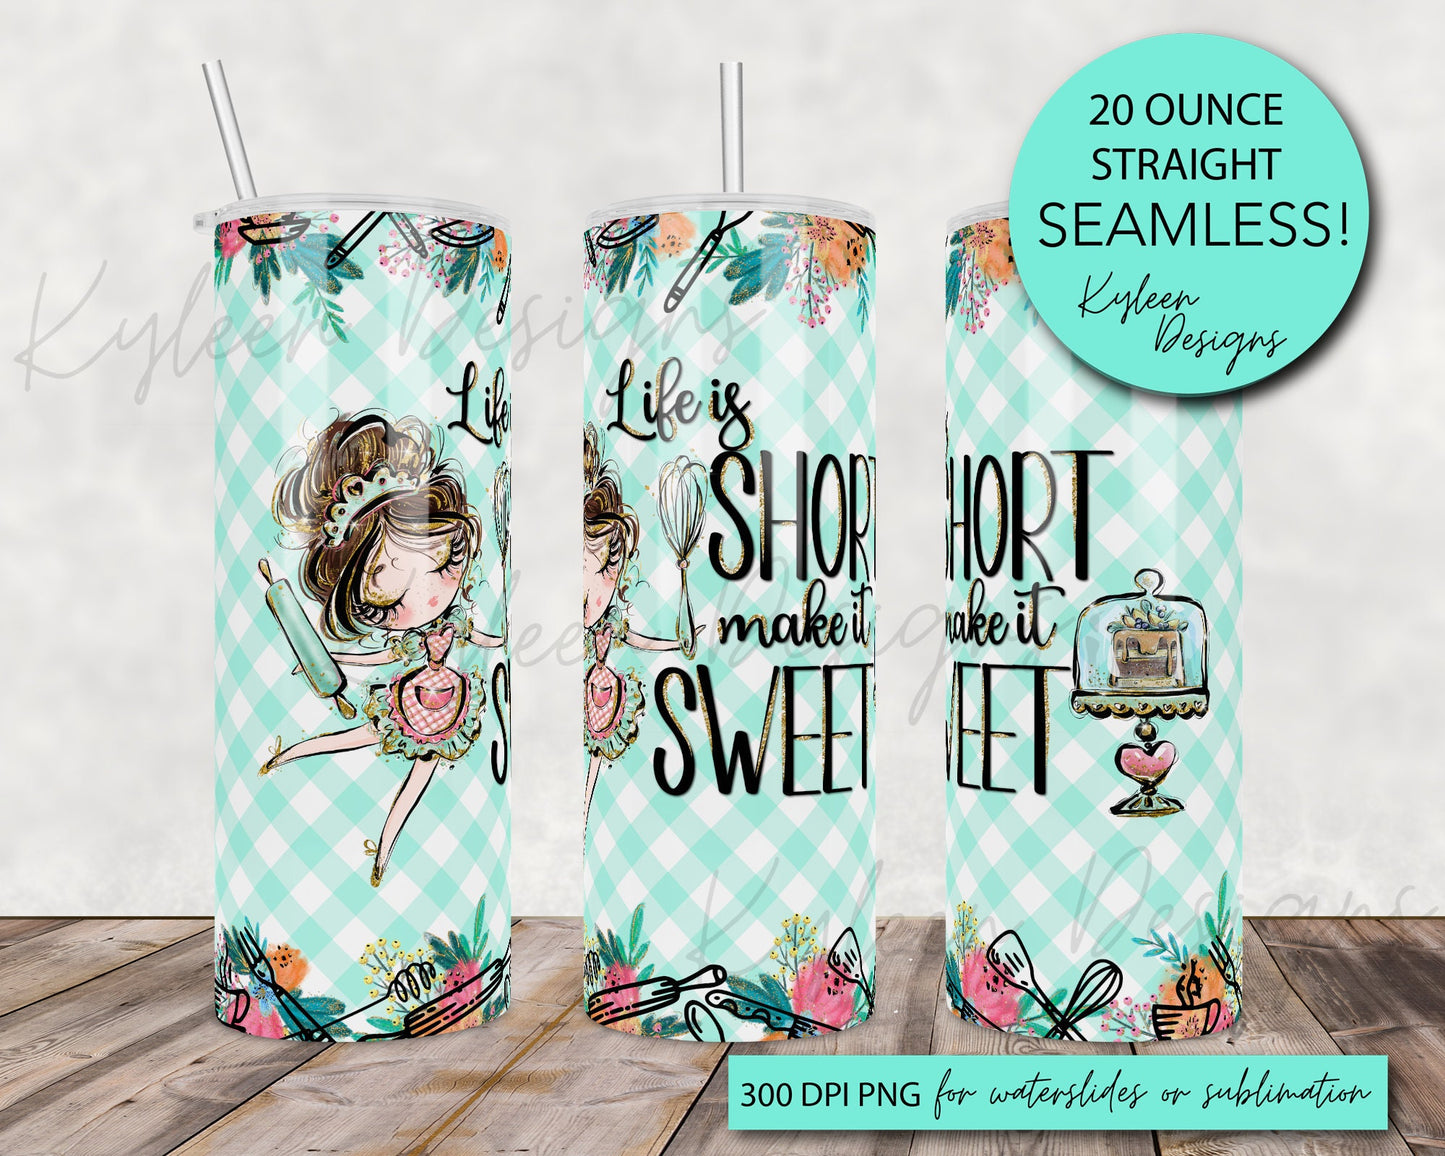 SEAMLESS Life is Short, make it sweet 20 ounce wrap for sublimation, waterslide High res PNG digital file- Straight only